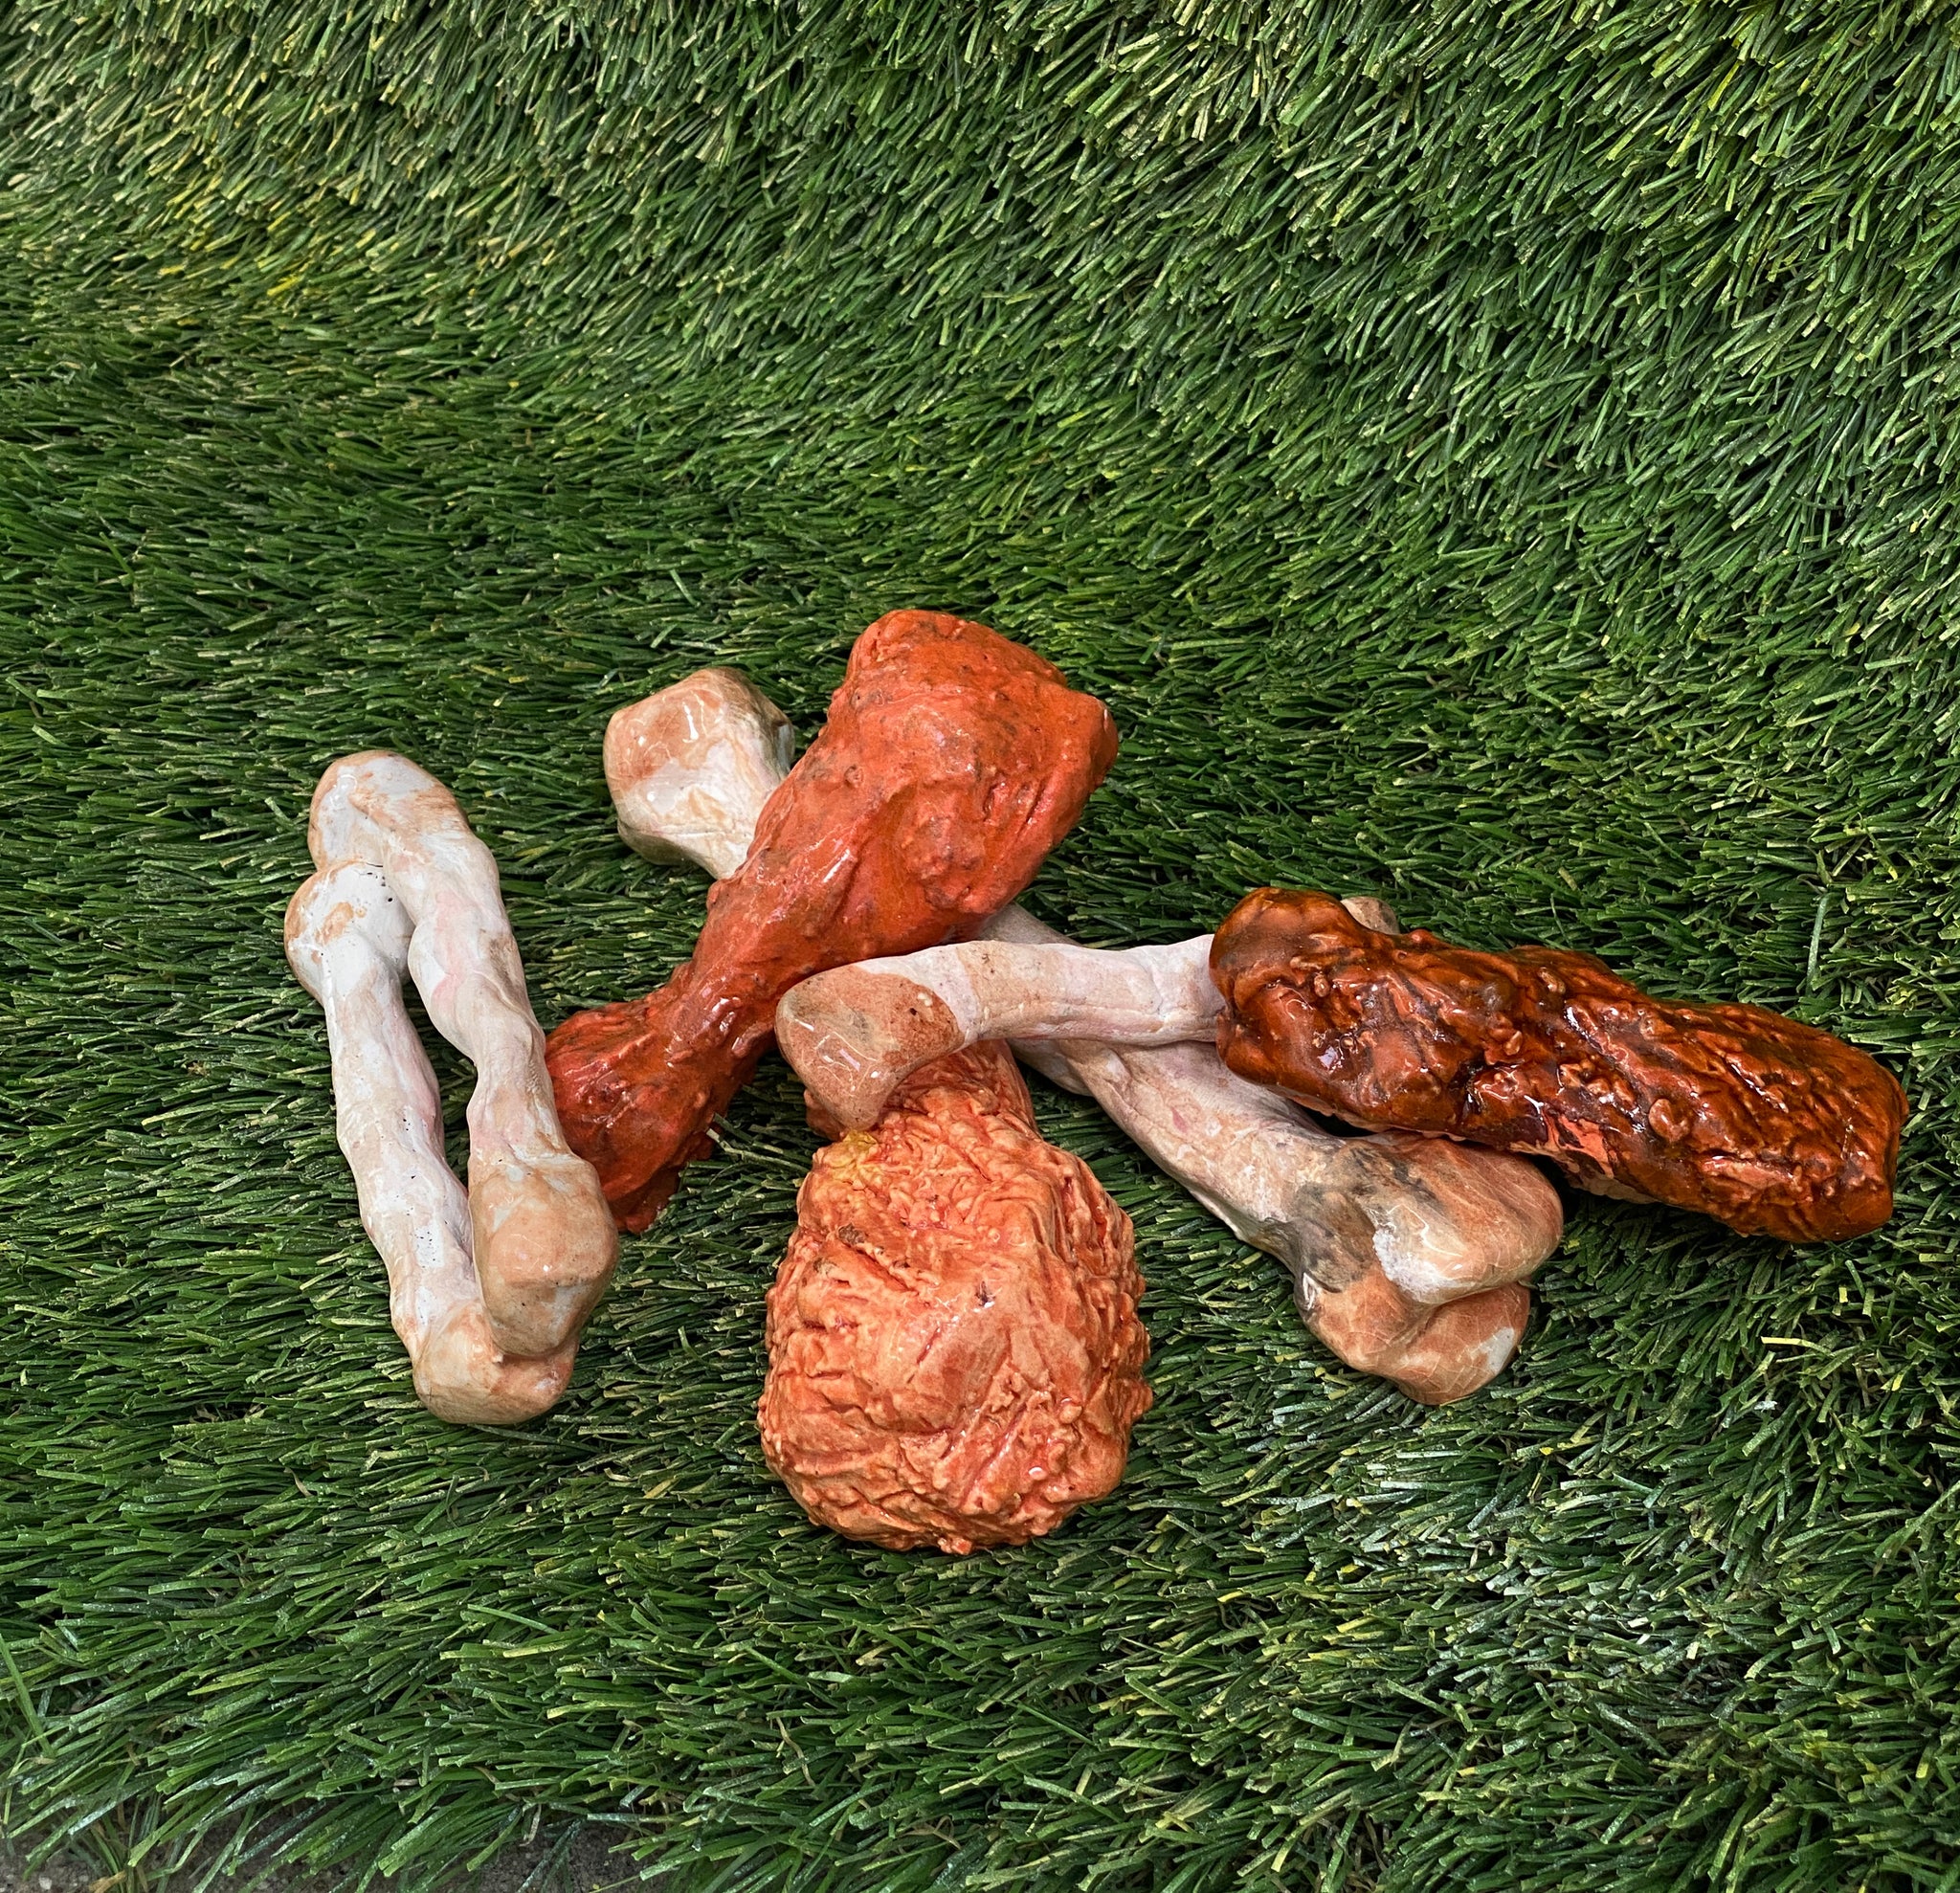 Ceramic sculptures of chicken wings and chicken bones on fake grass